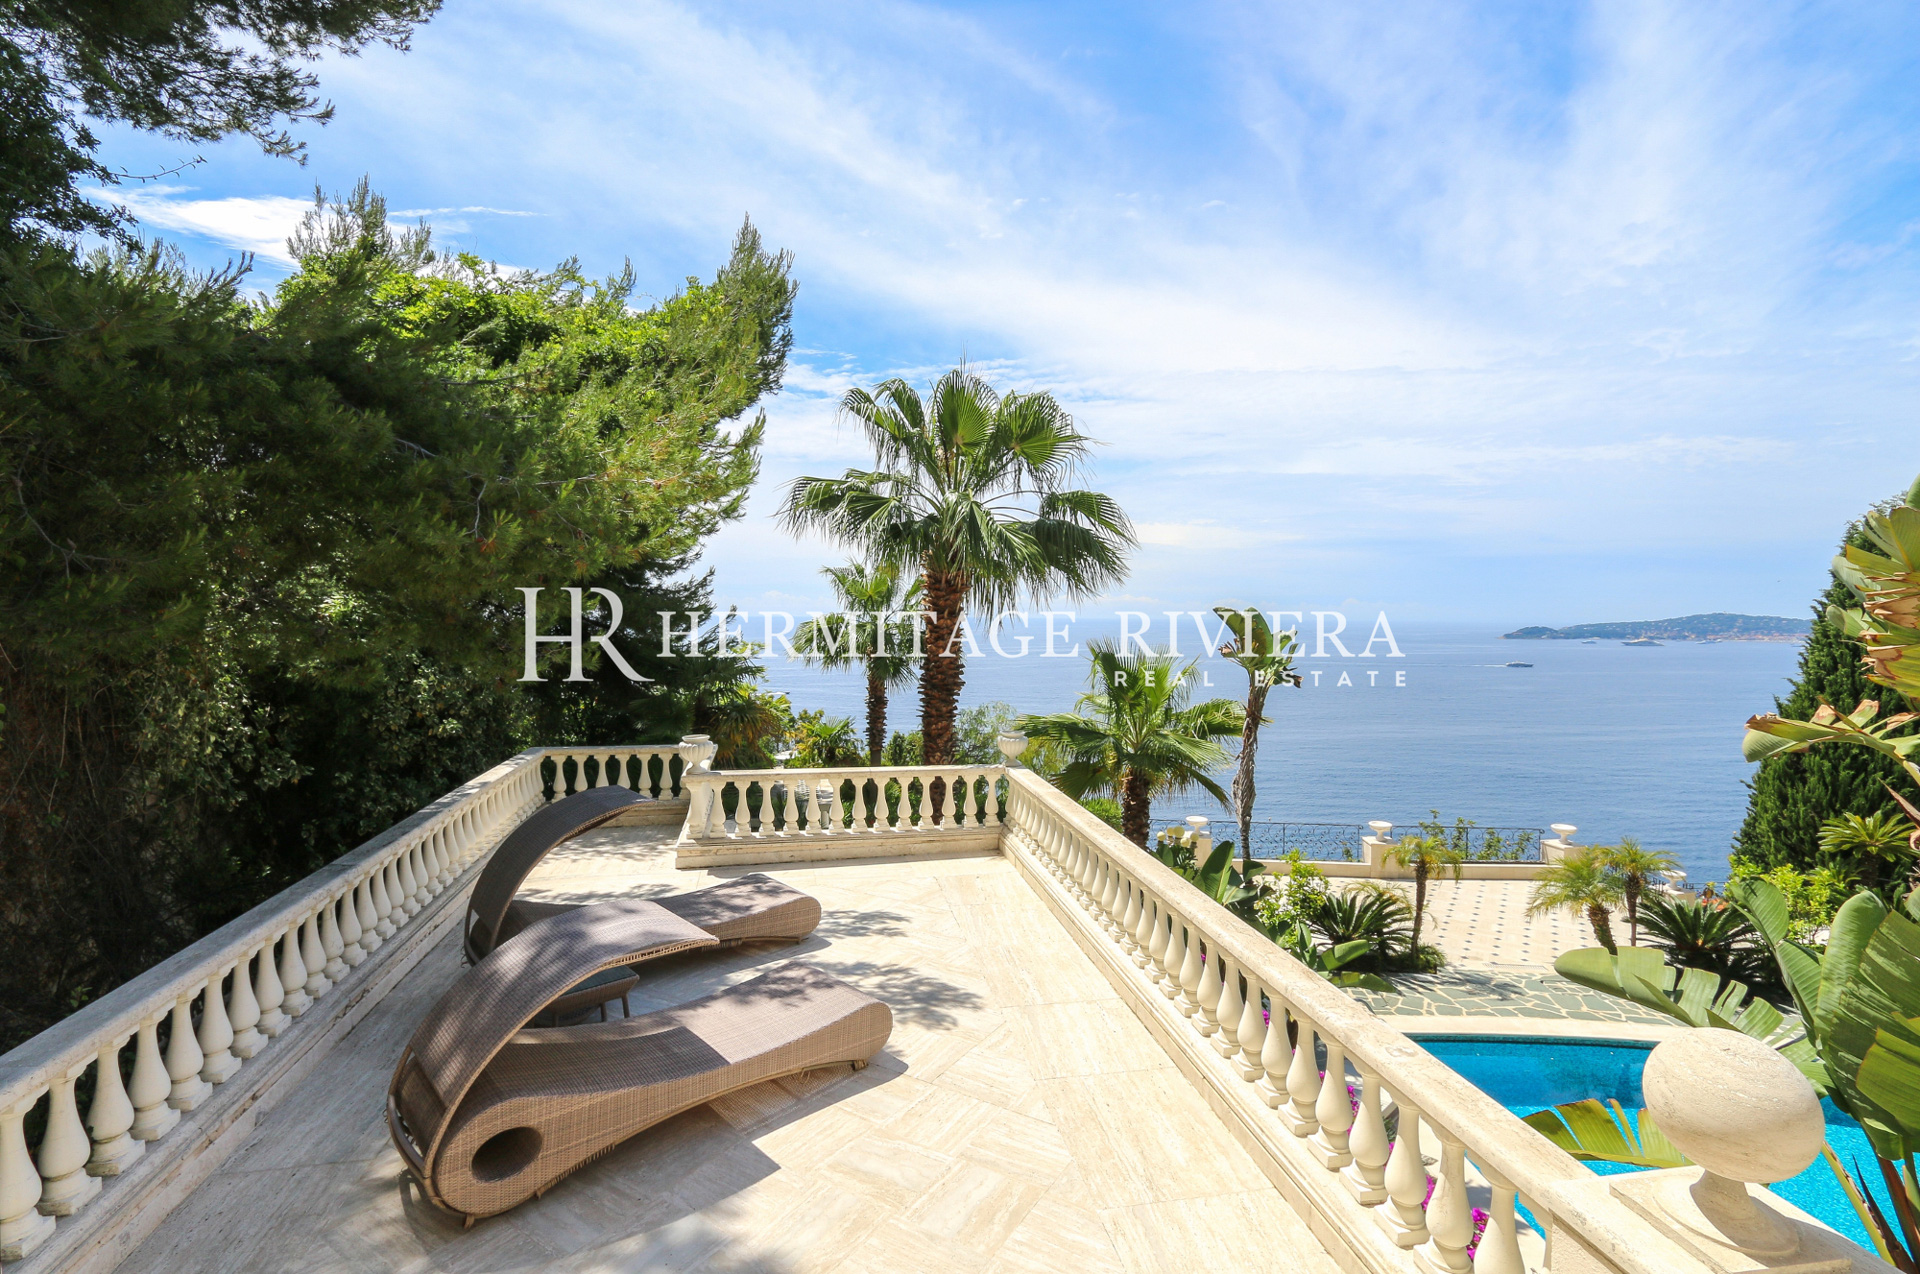 Property close Monaco with panoramic view (image 20)